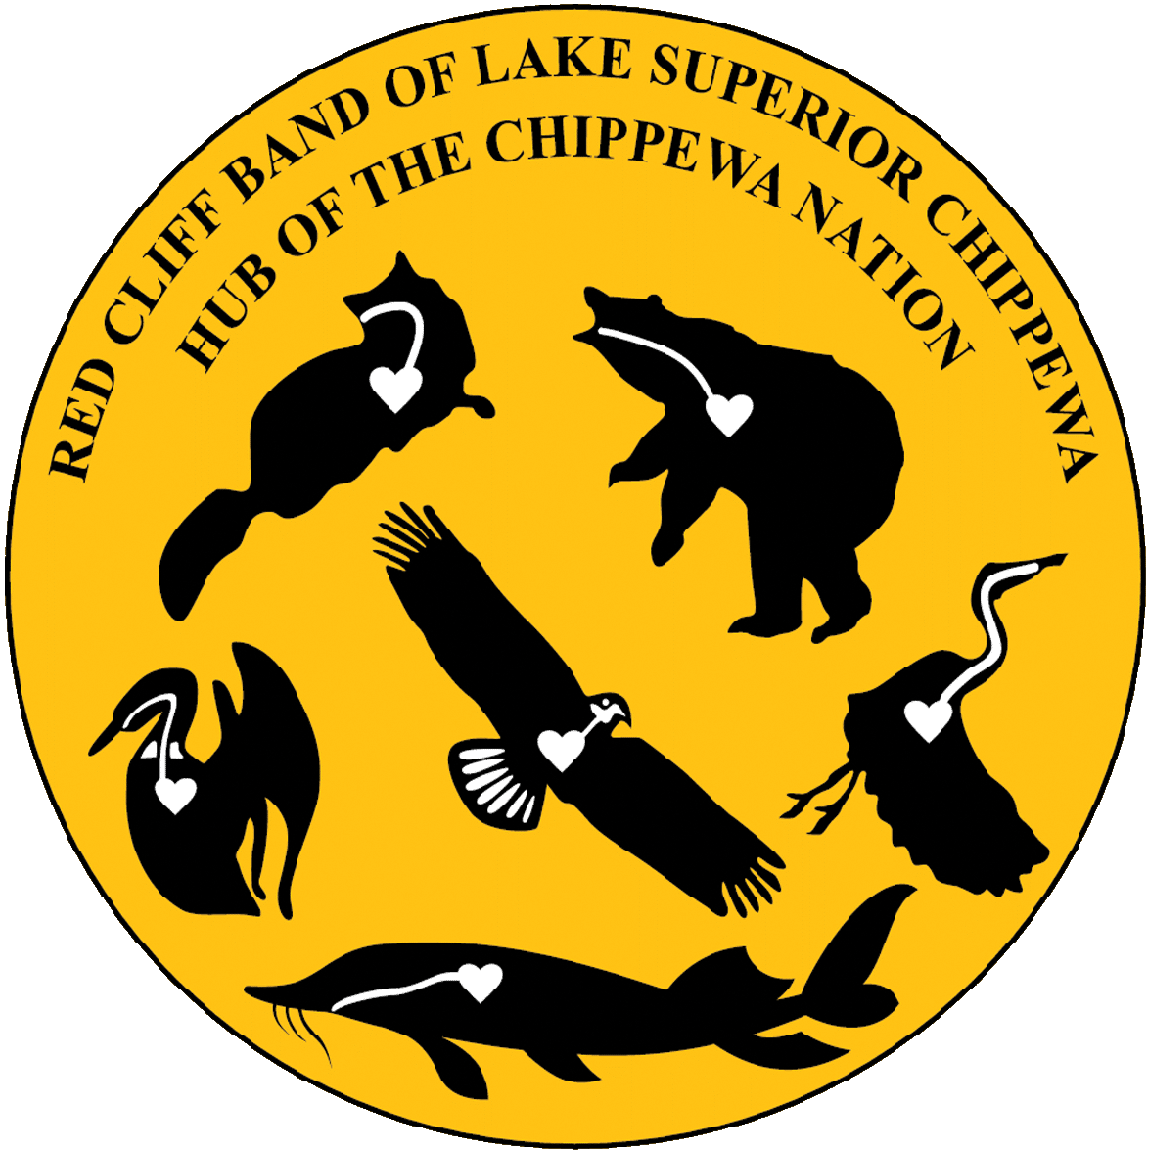 Seal of the Red Cliff Band of Lake Superior Chippewa